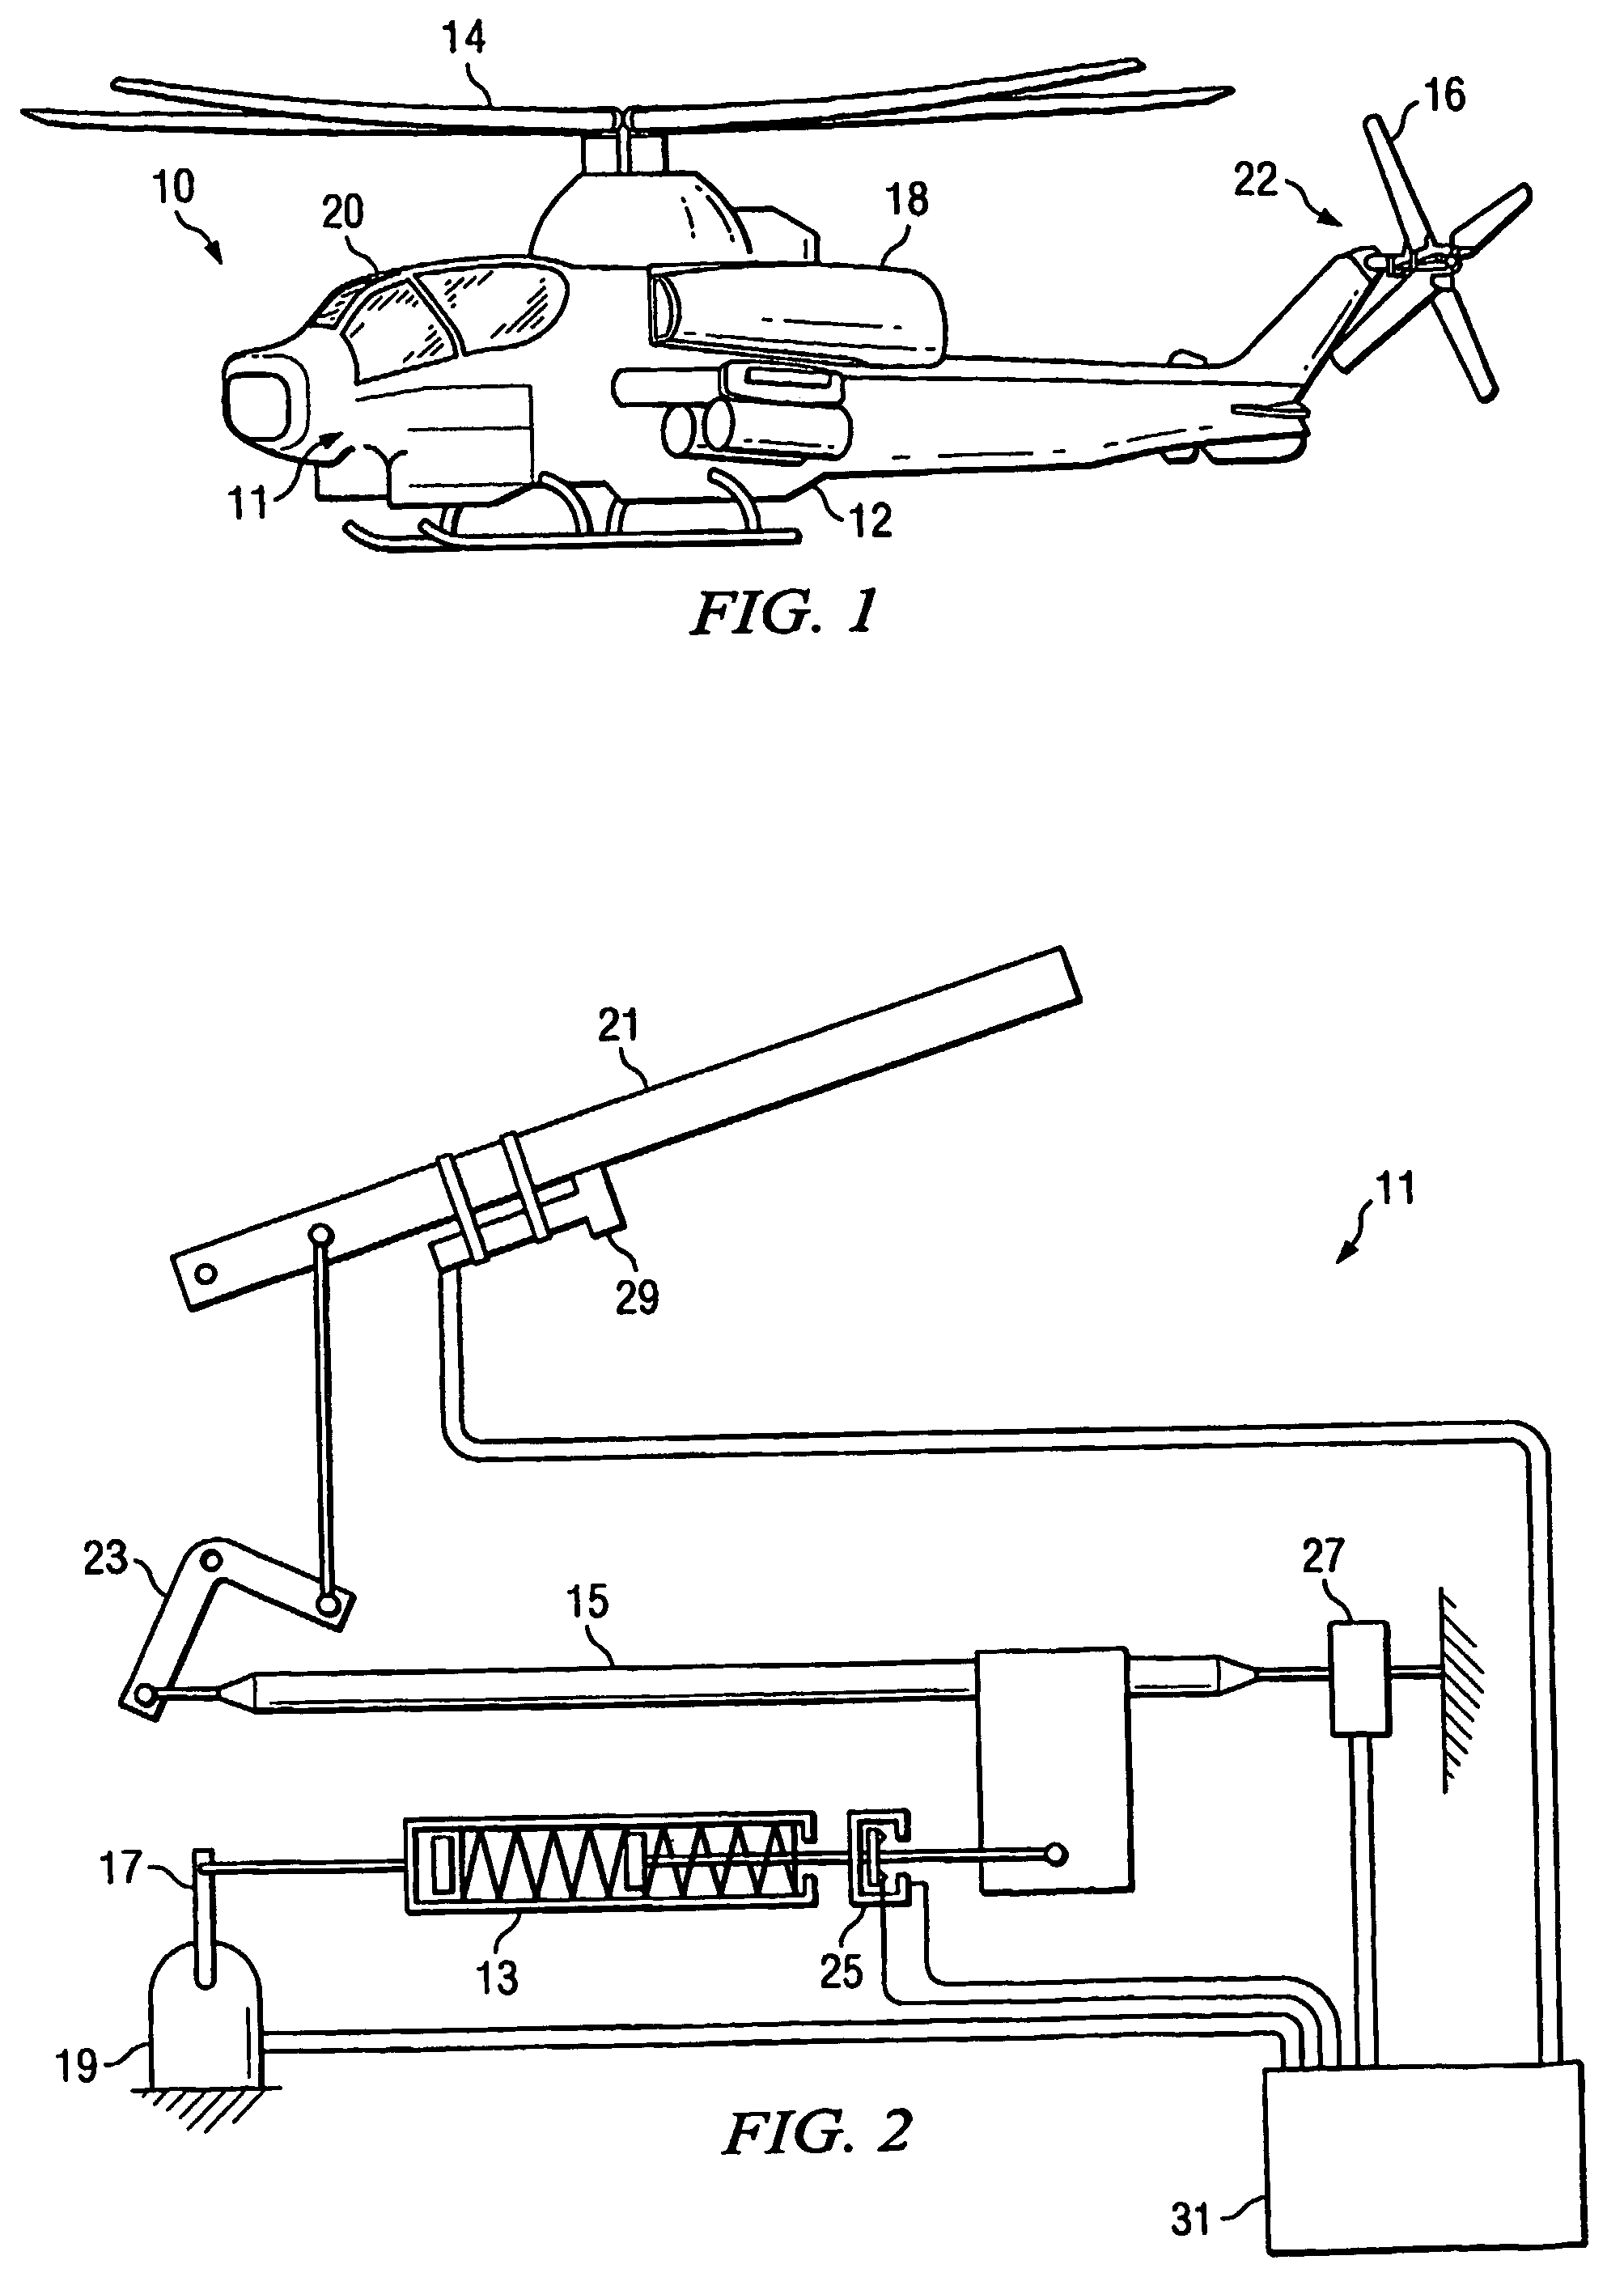 Method and apparatus for tactile cueing of aircraft controls